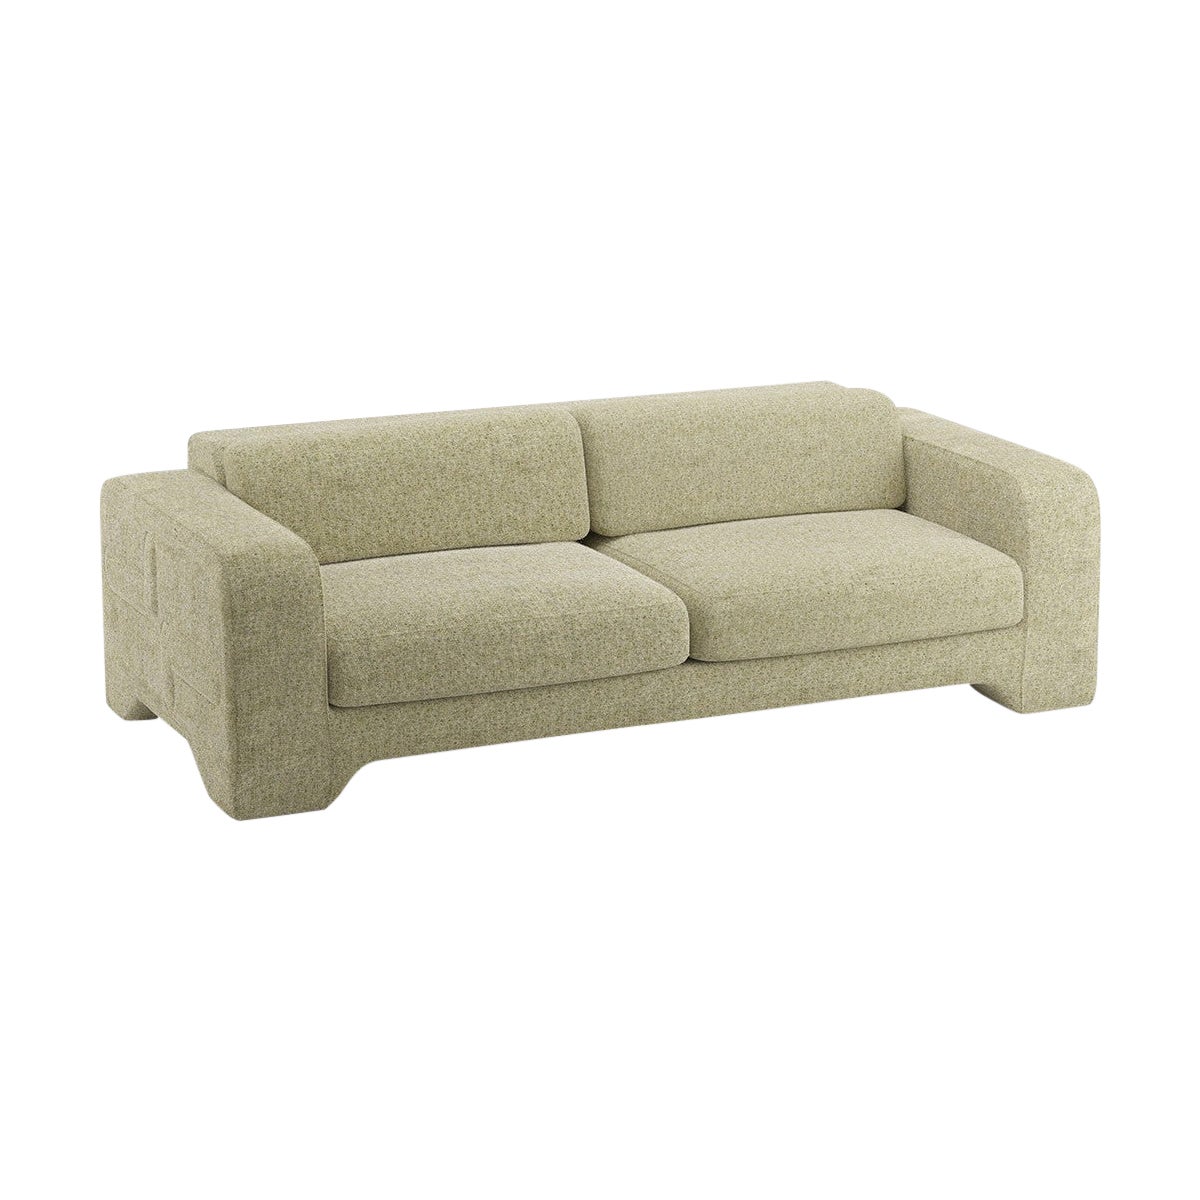 Popus Editions Giovanna 2.5 Seater Sofa in Cactus London Linen Fabric For Sale